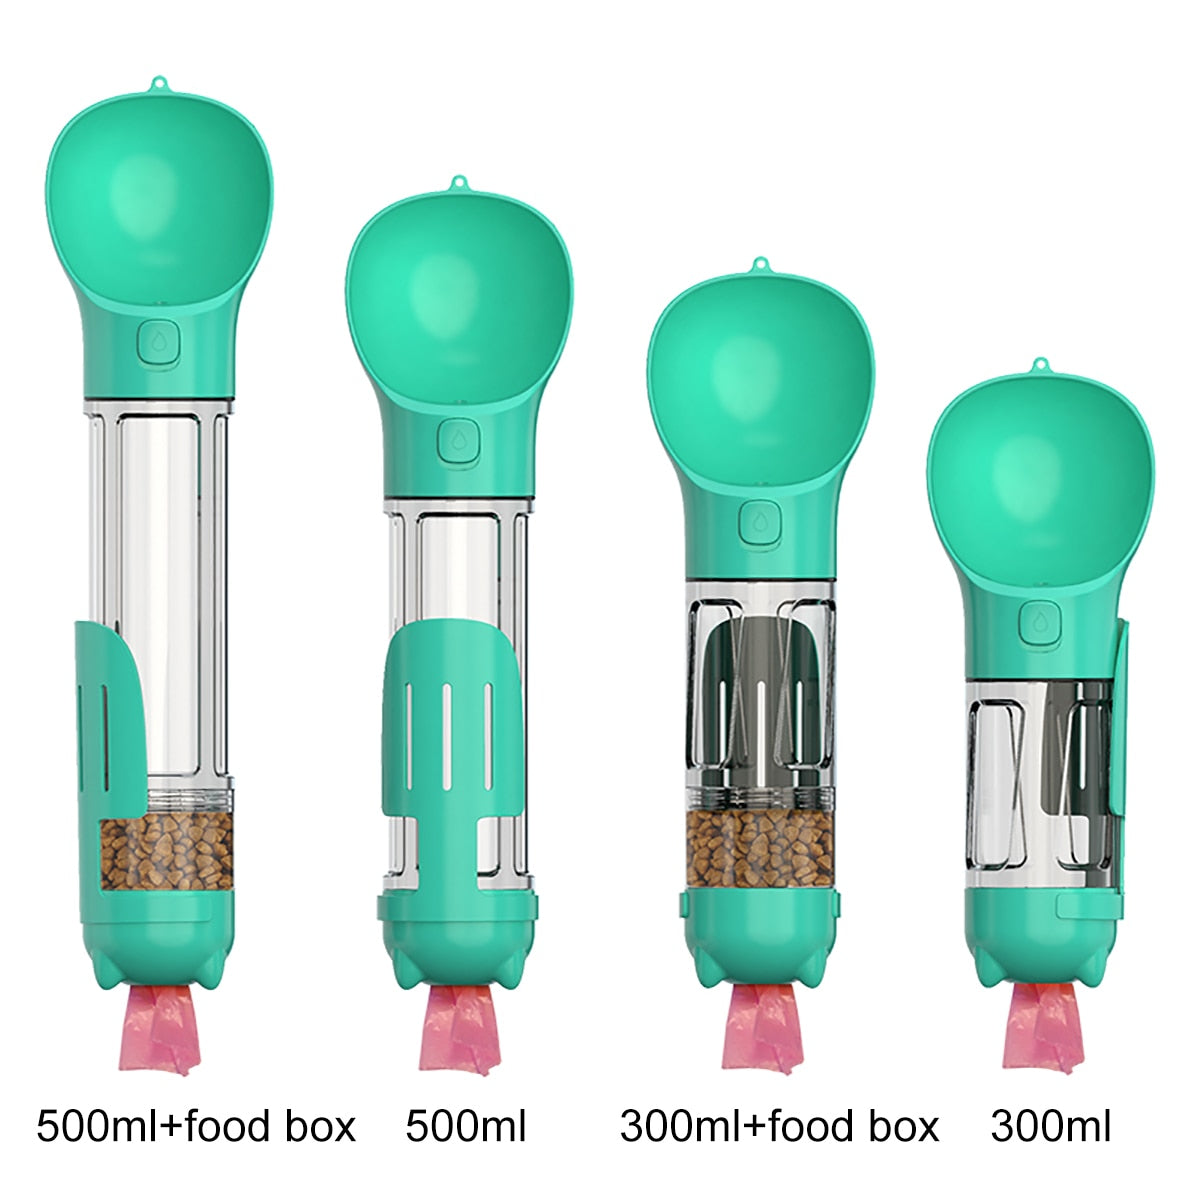 4 In 1 Pet Bottle - HOW DO I BUY THIS Green / 300ml with food box